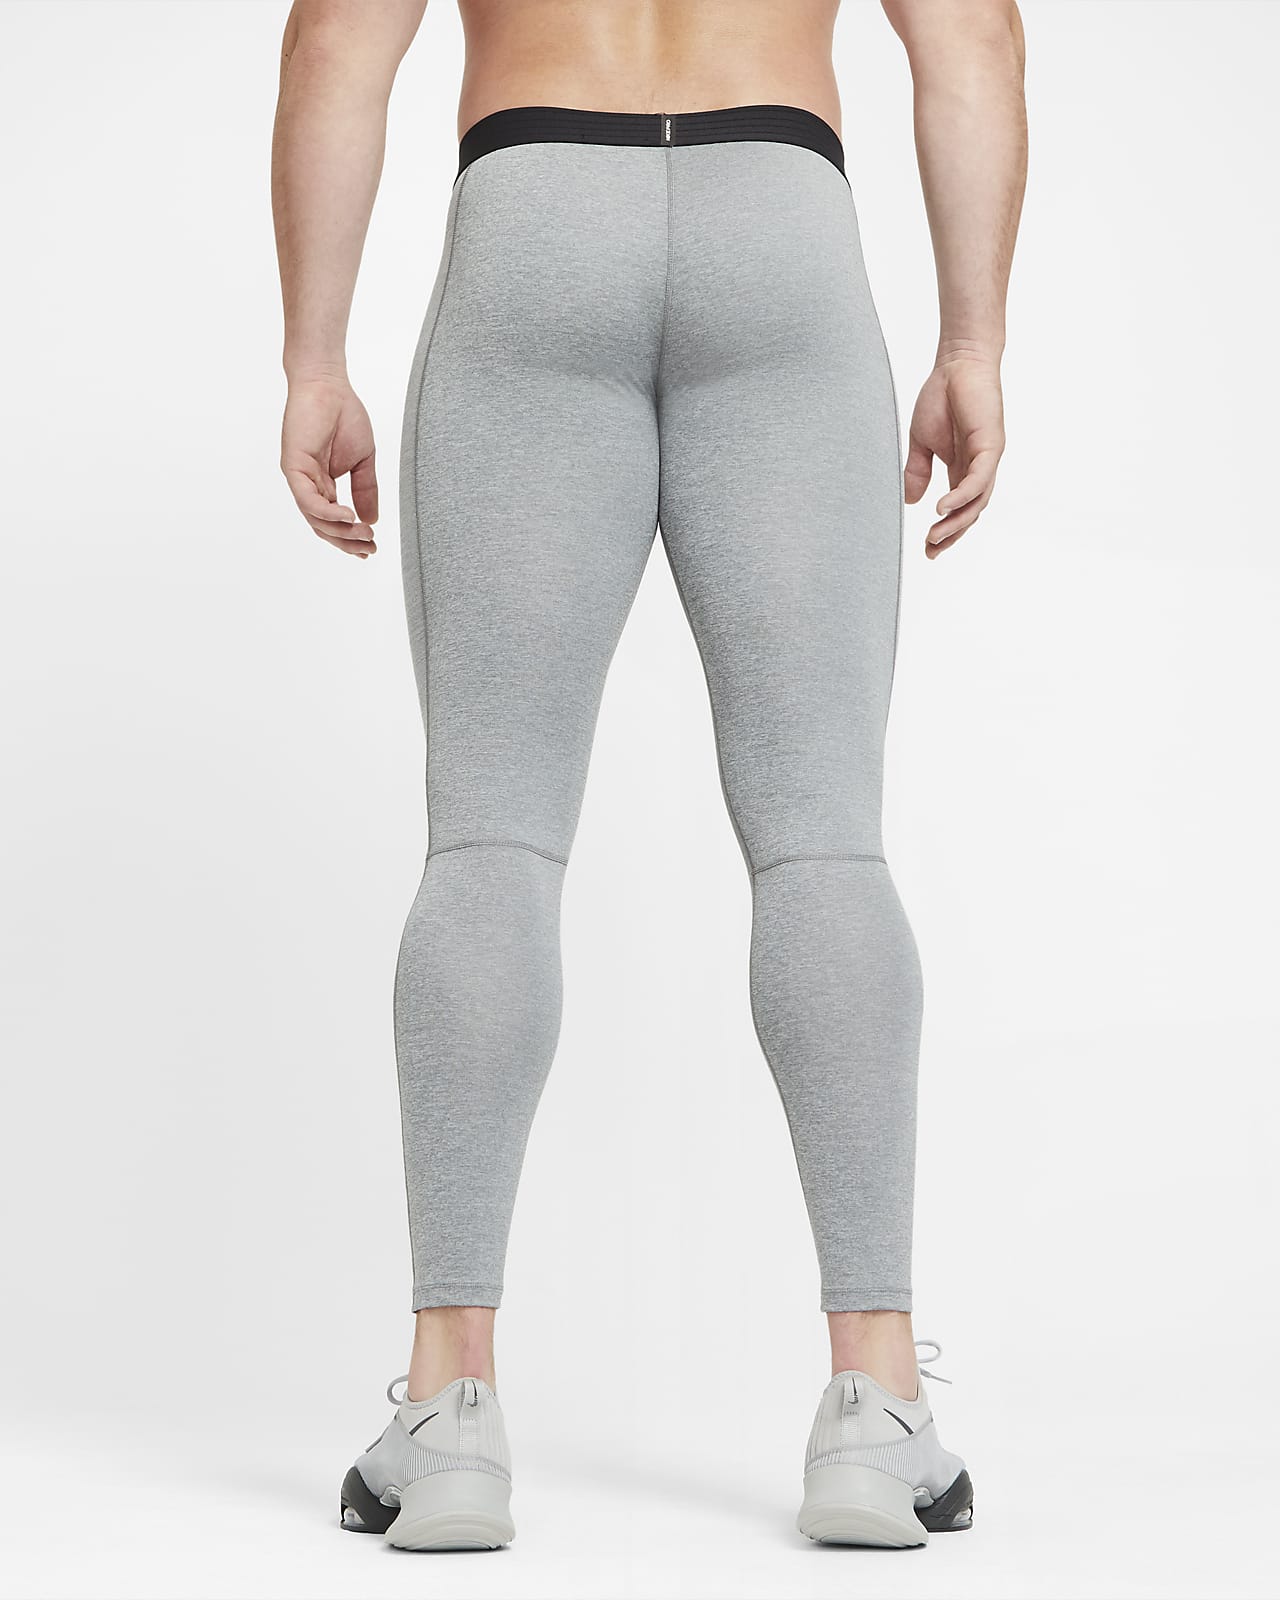 nike mens tights size guide